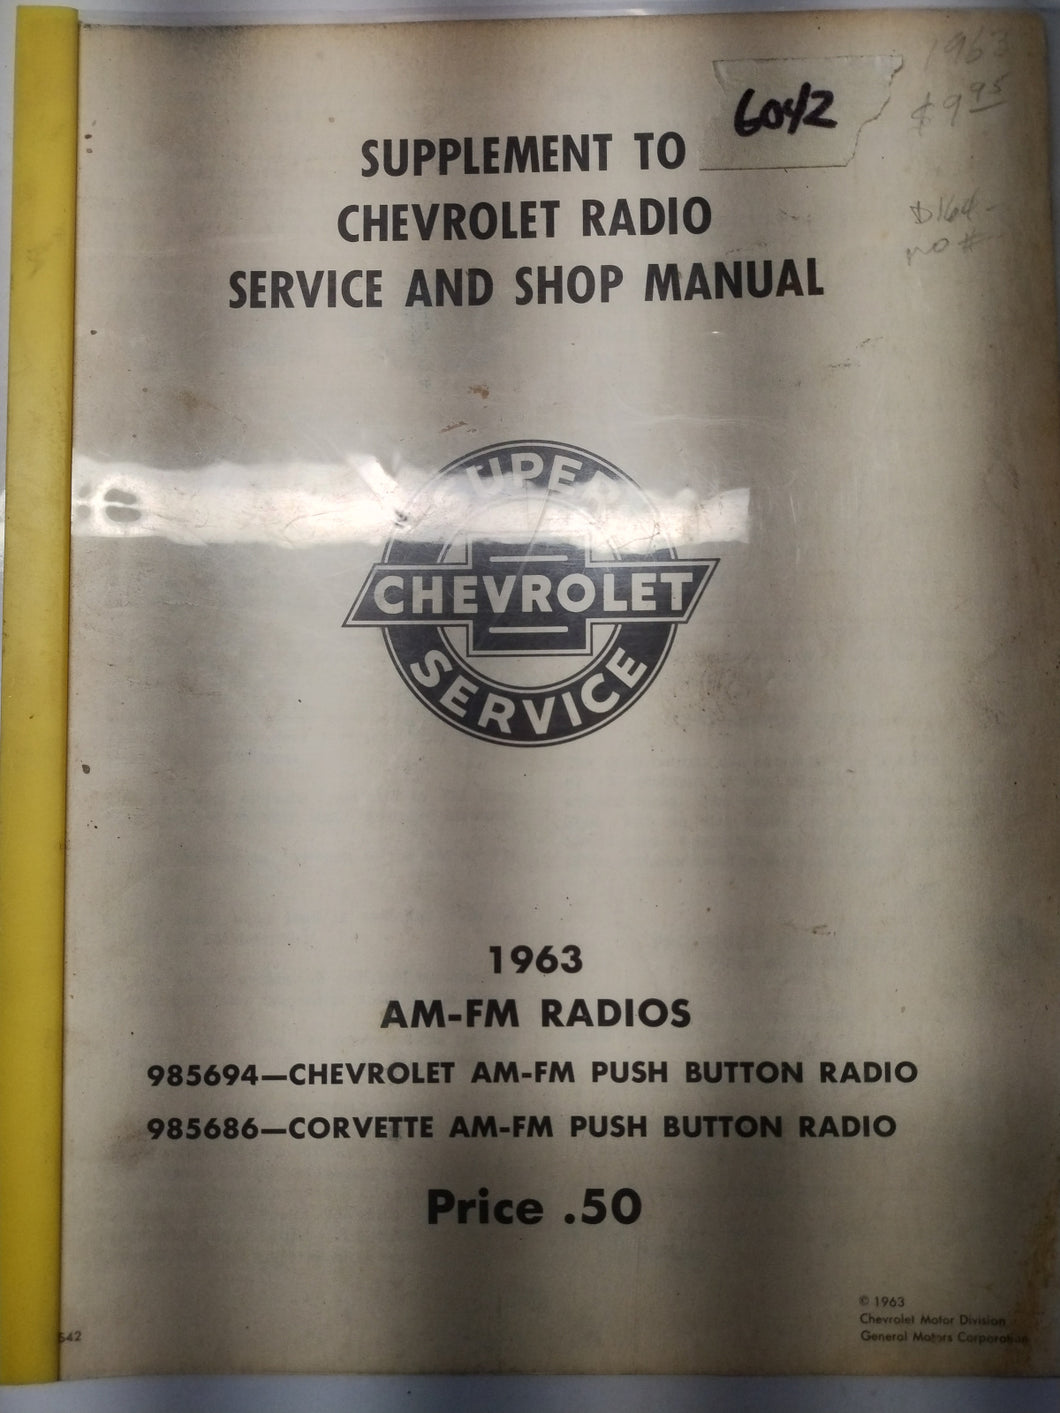 1963 Supplement to Chevrolet Service and Shop Manual